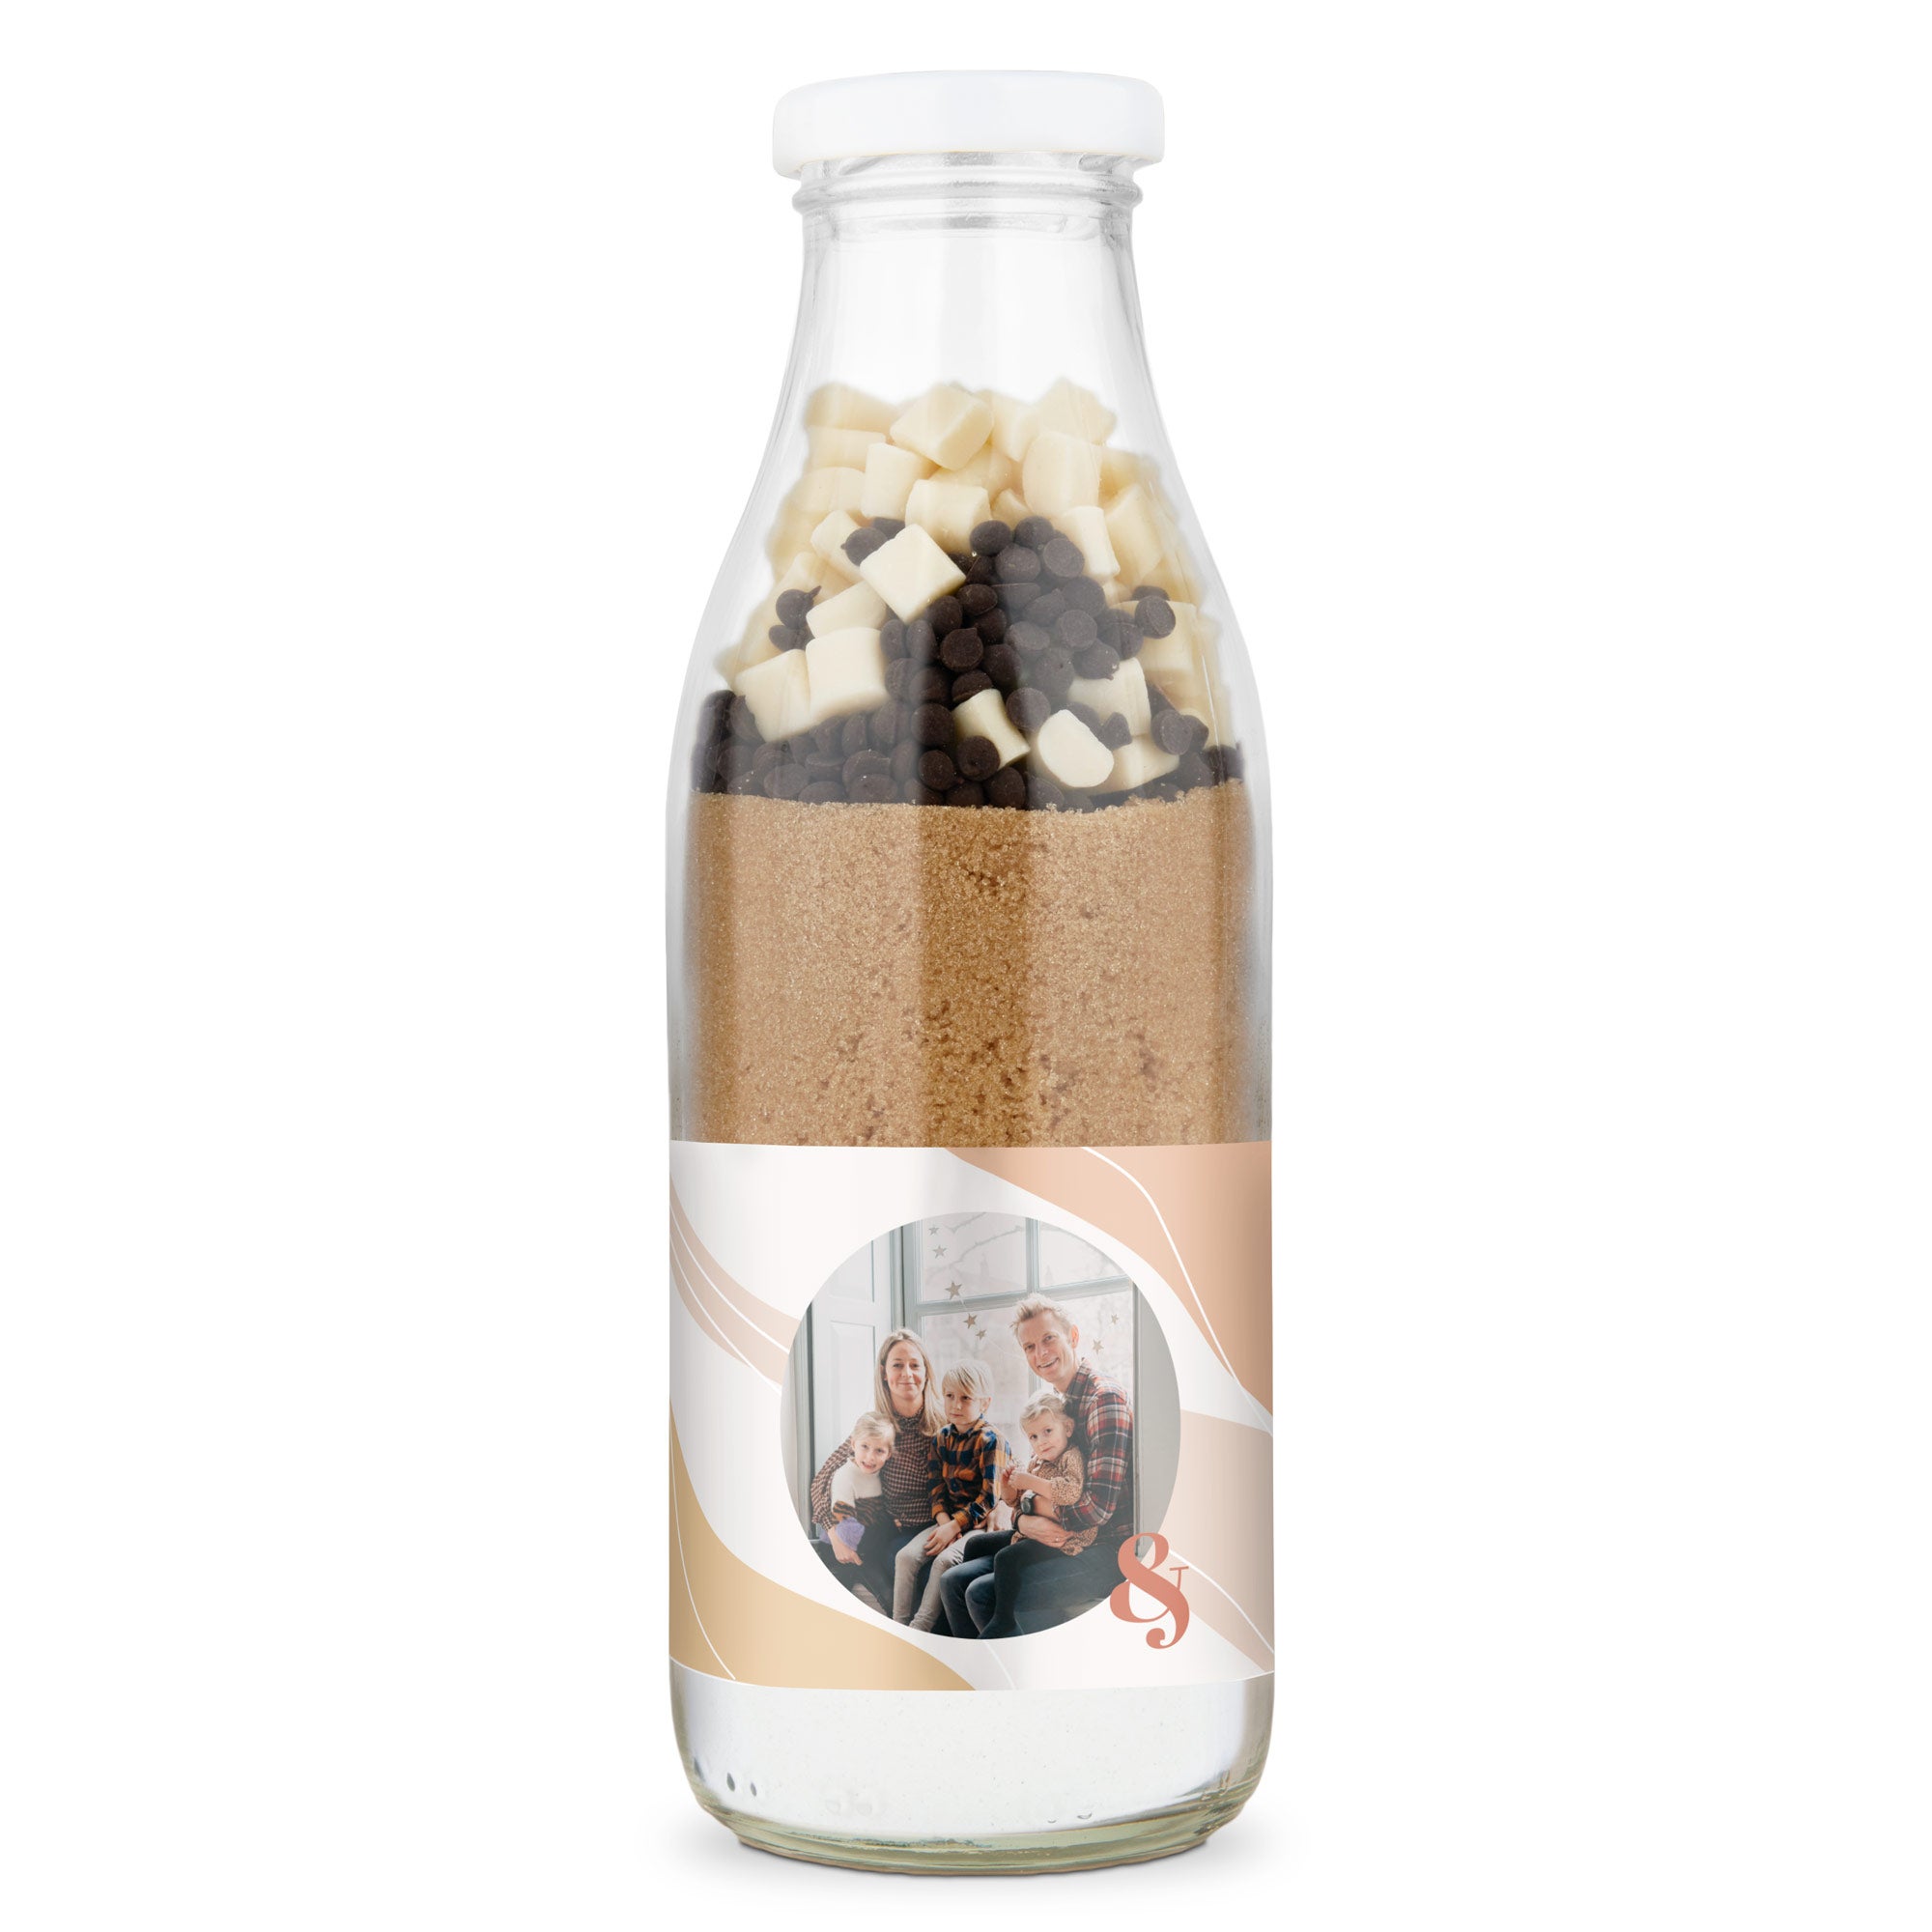 Muffin baking mixture with personalised label